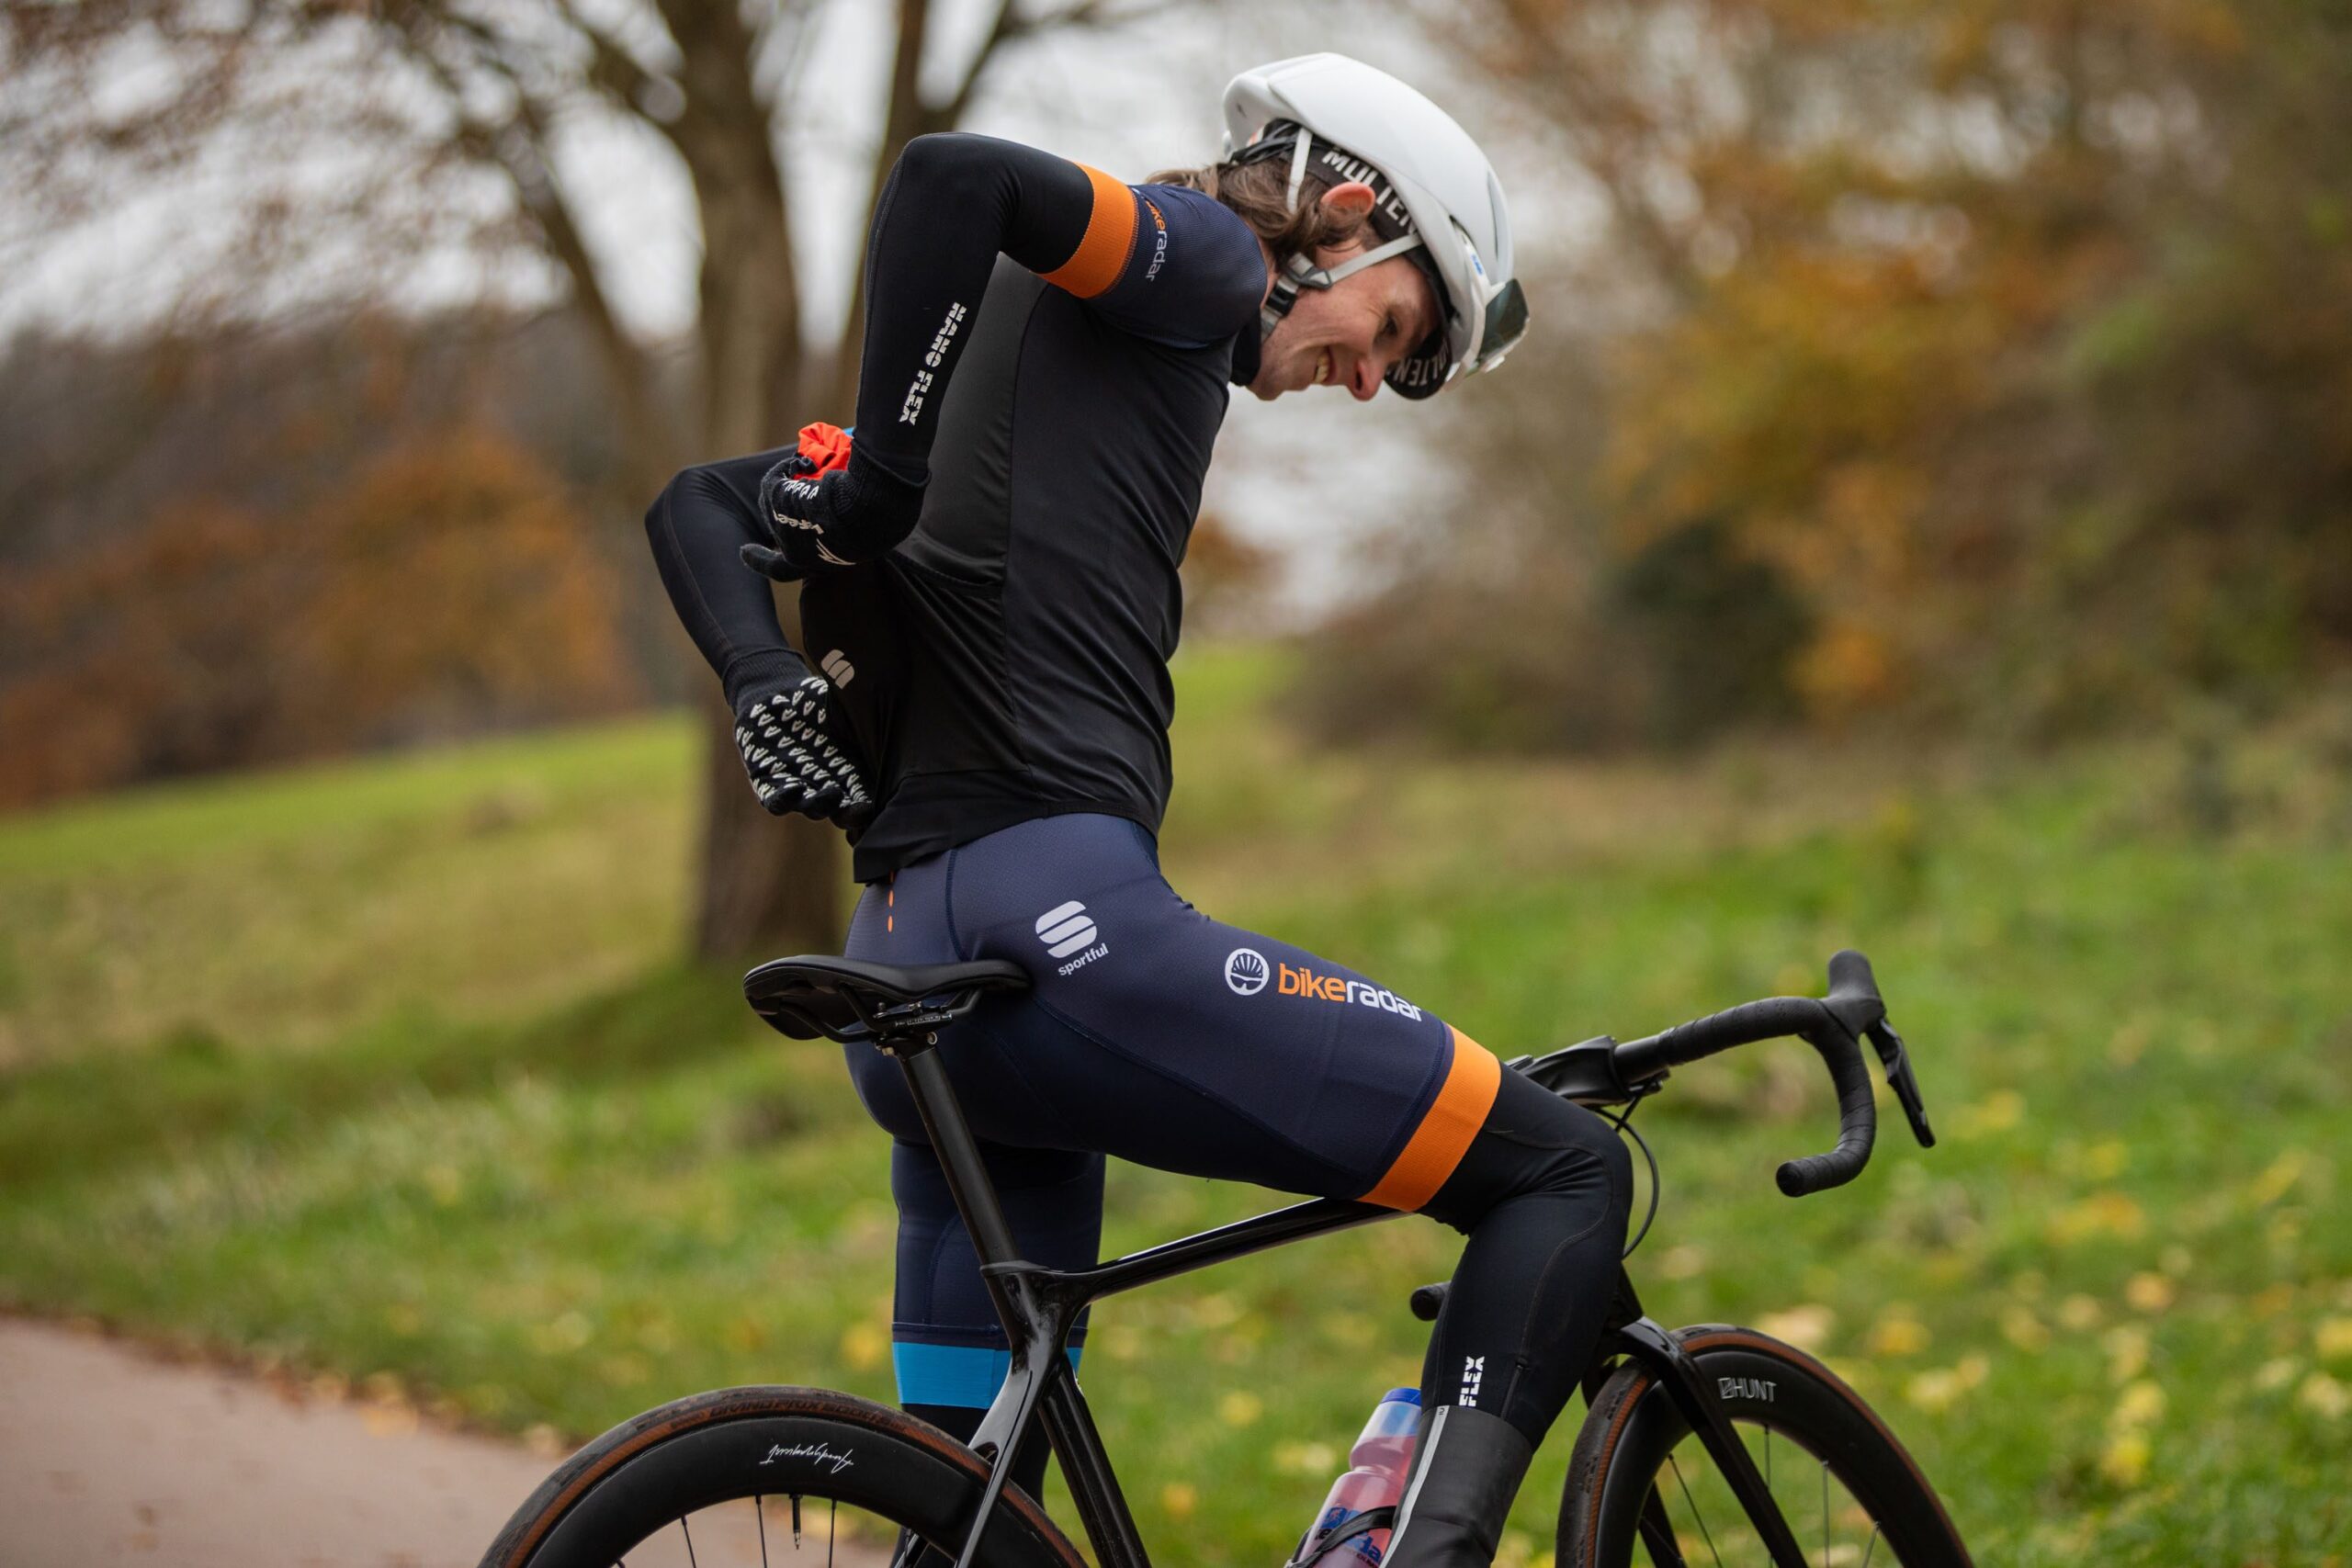 Review: Bioracer Race Proven Winter Protect Bib Tights and Jacket